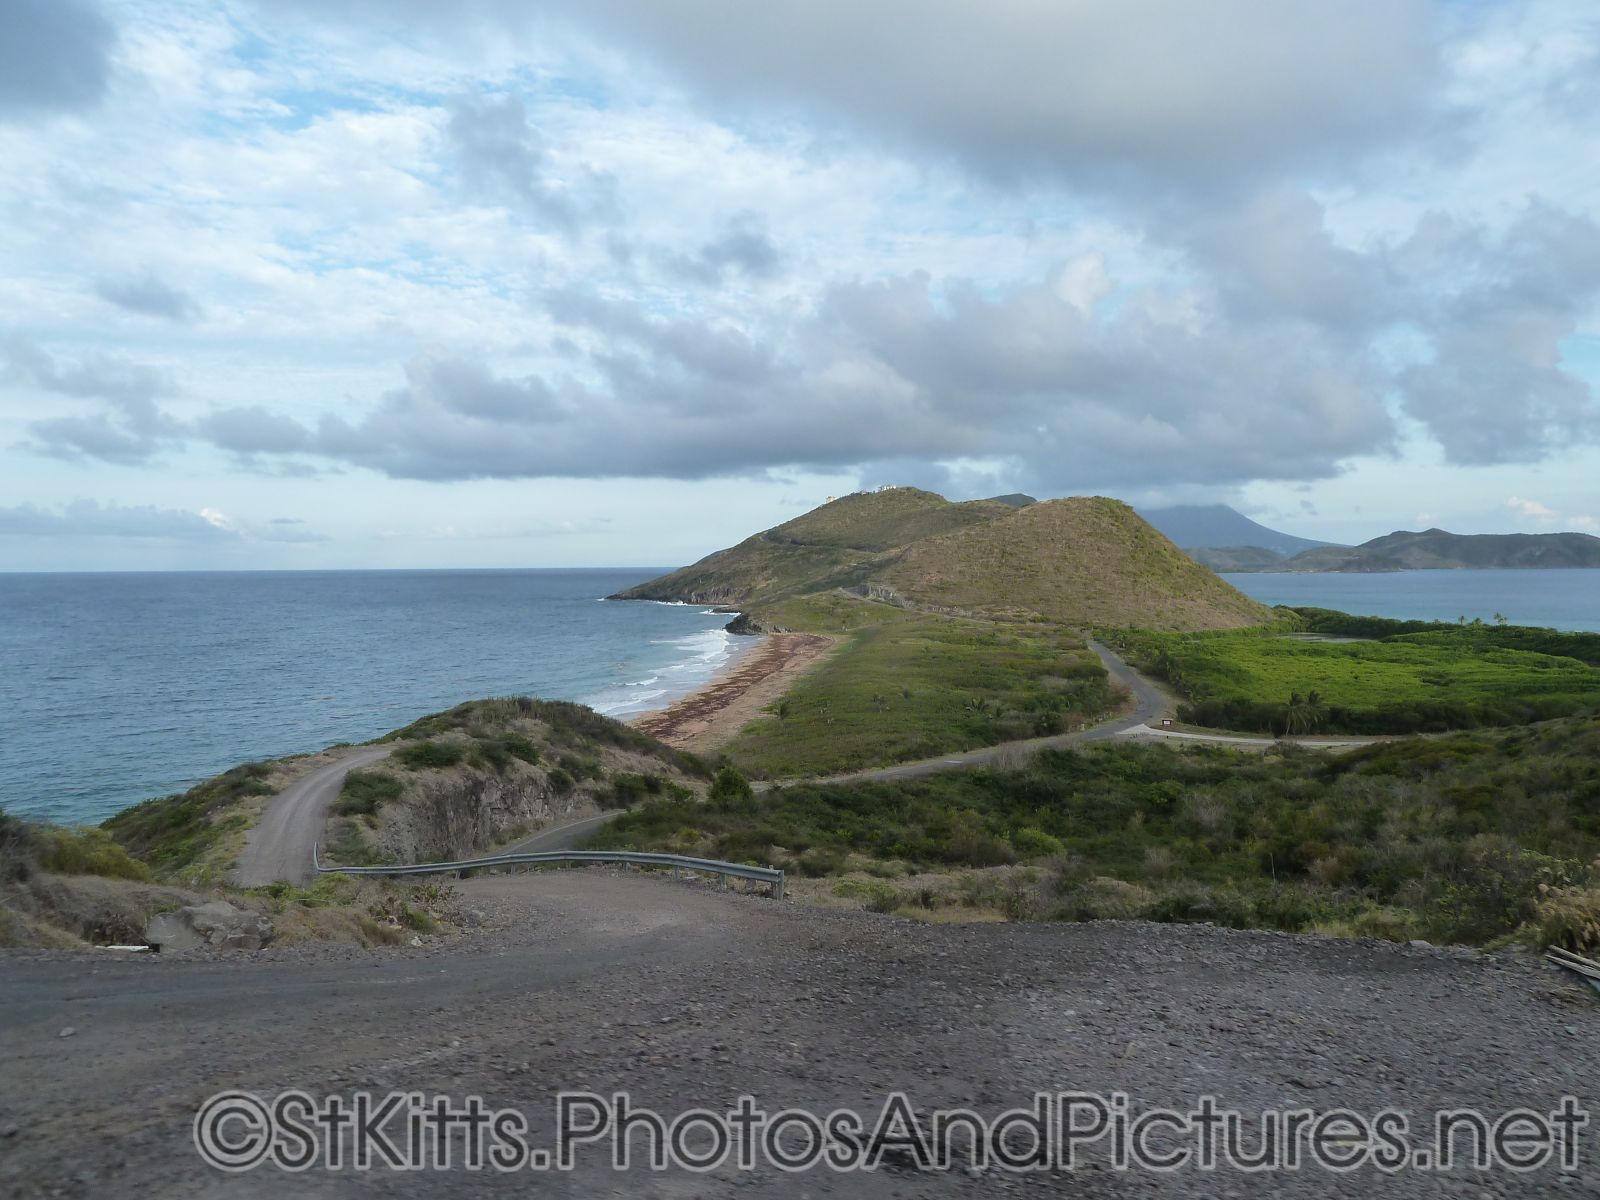 View from a St Kitts moutain row at Caribbean Sea and Atlantic Ocean.jpg
